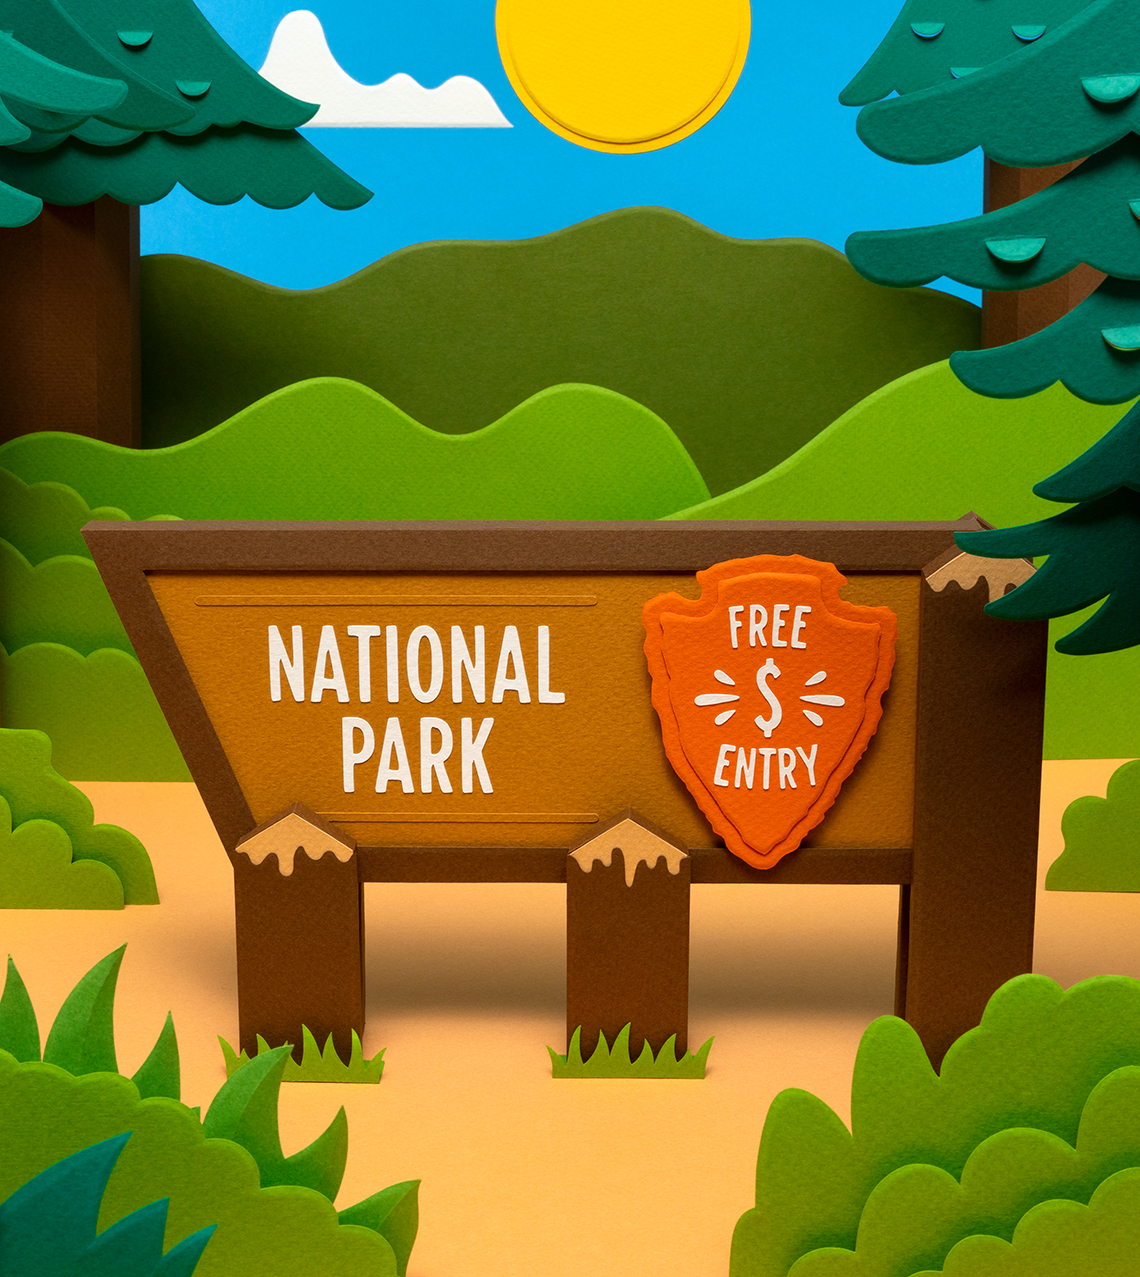 an illustration of a sign for a national park with free entry on it